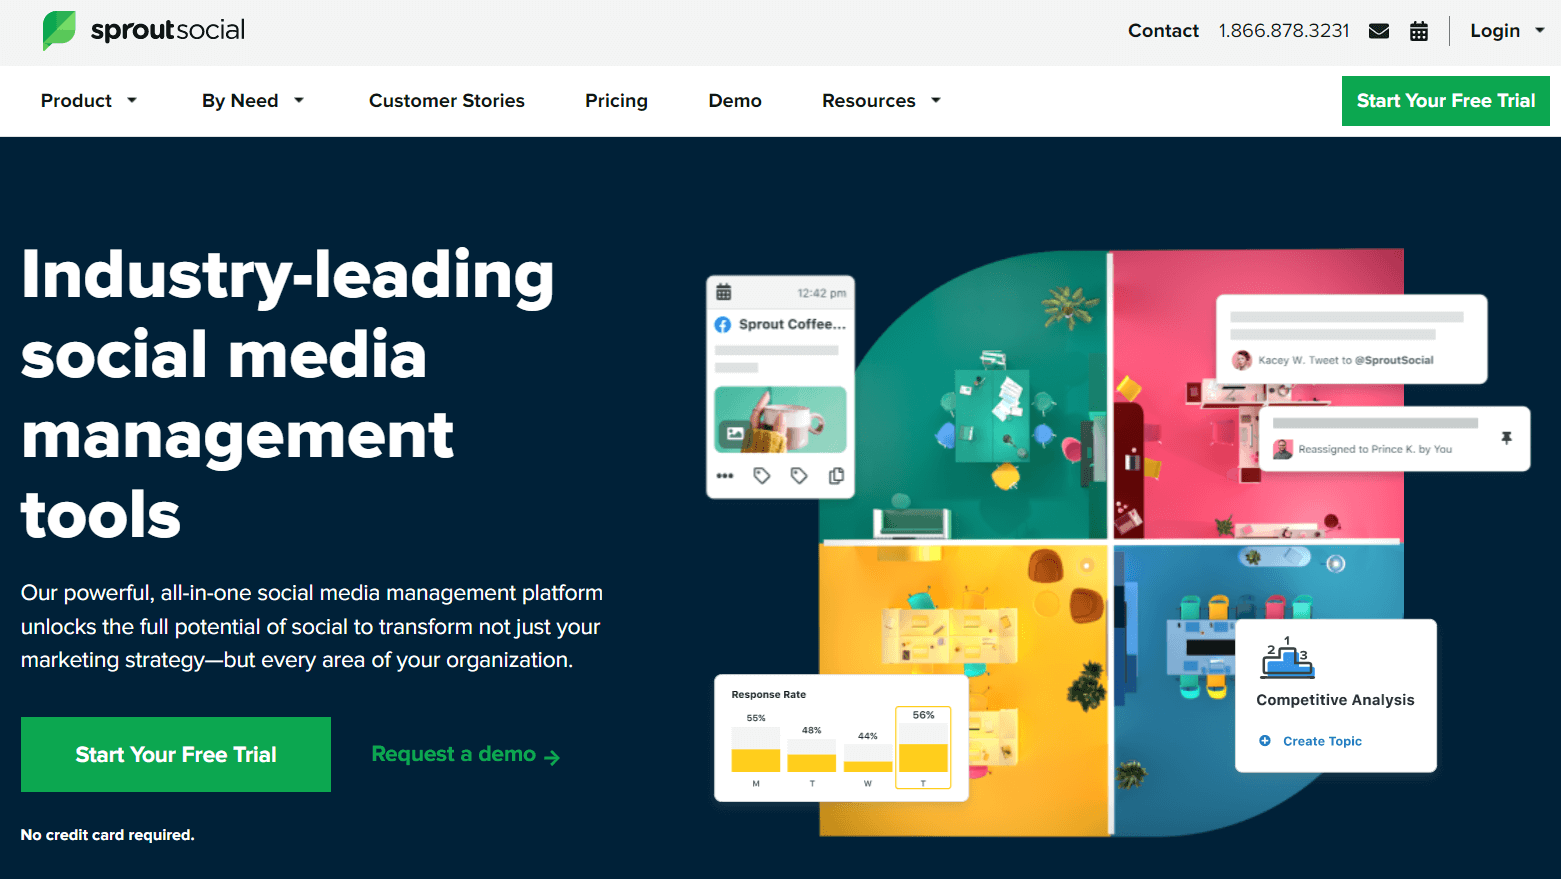 A screenshot of SproutSocial's website